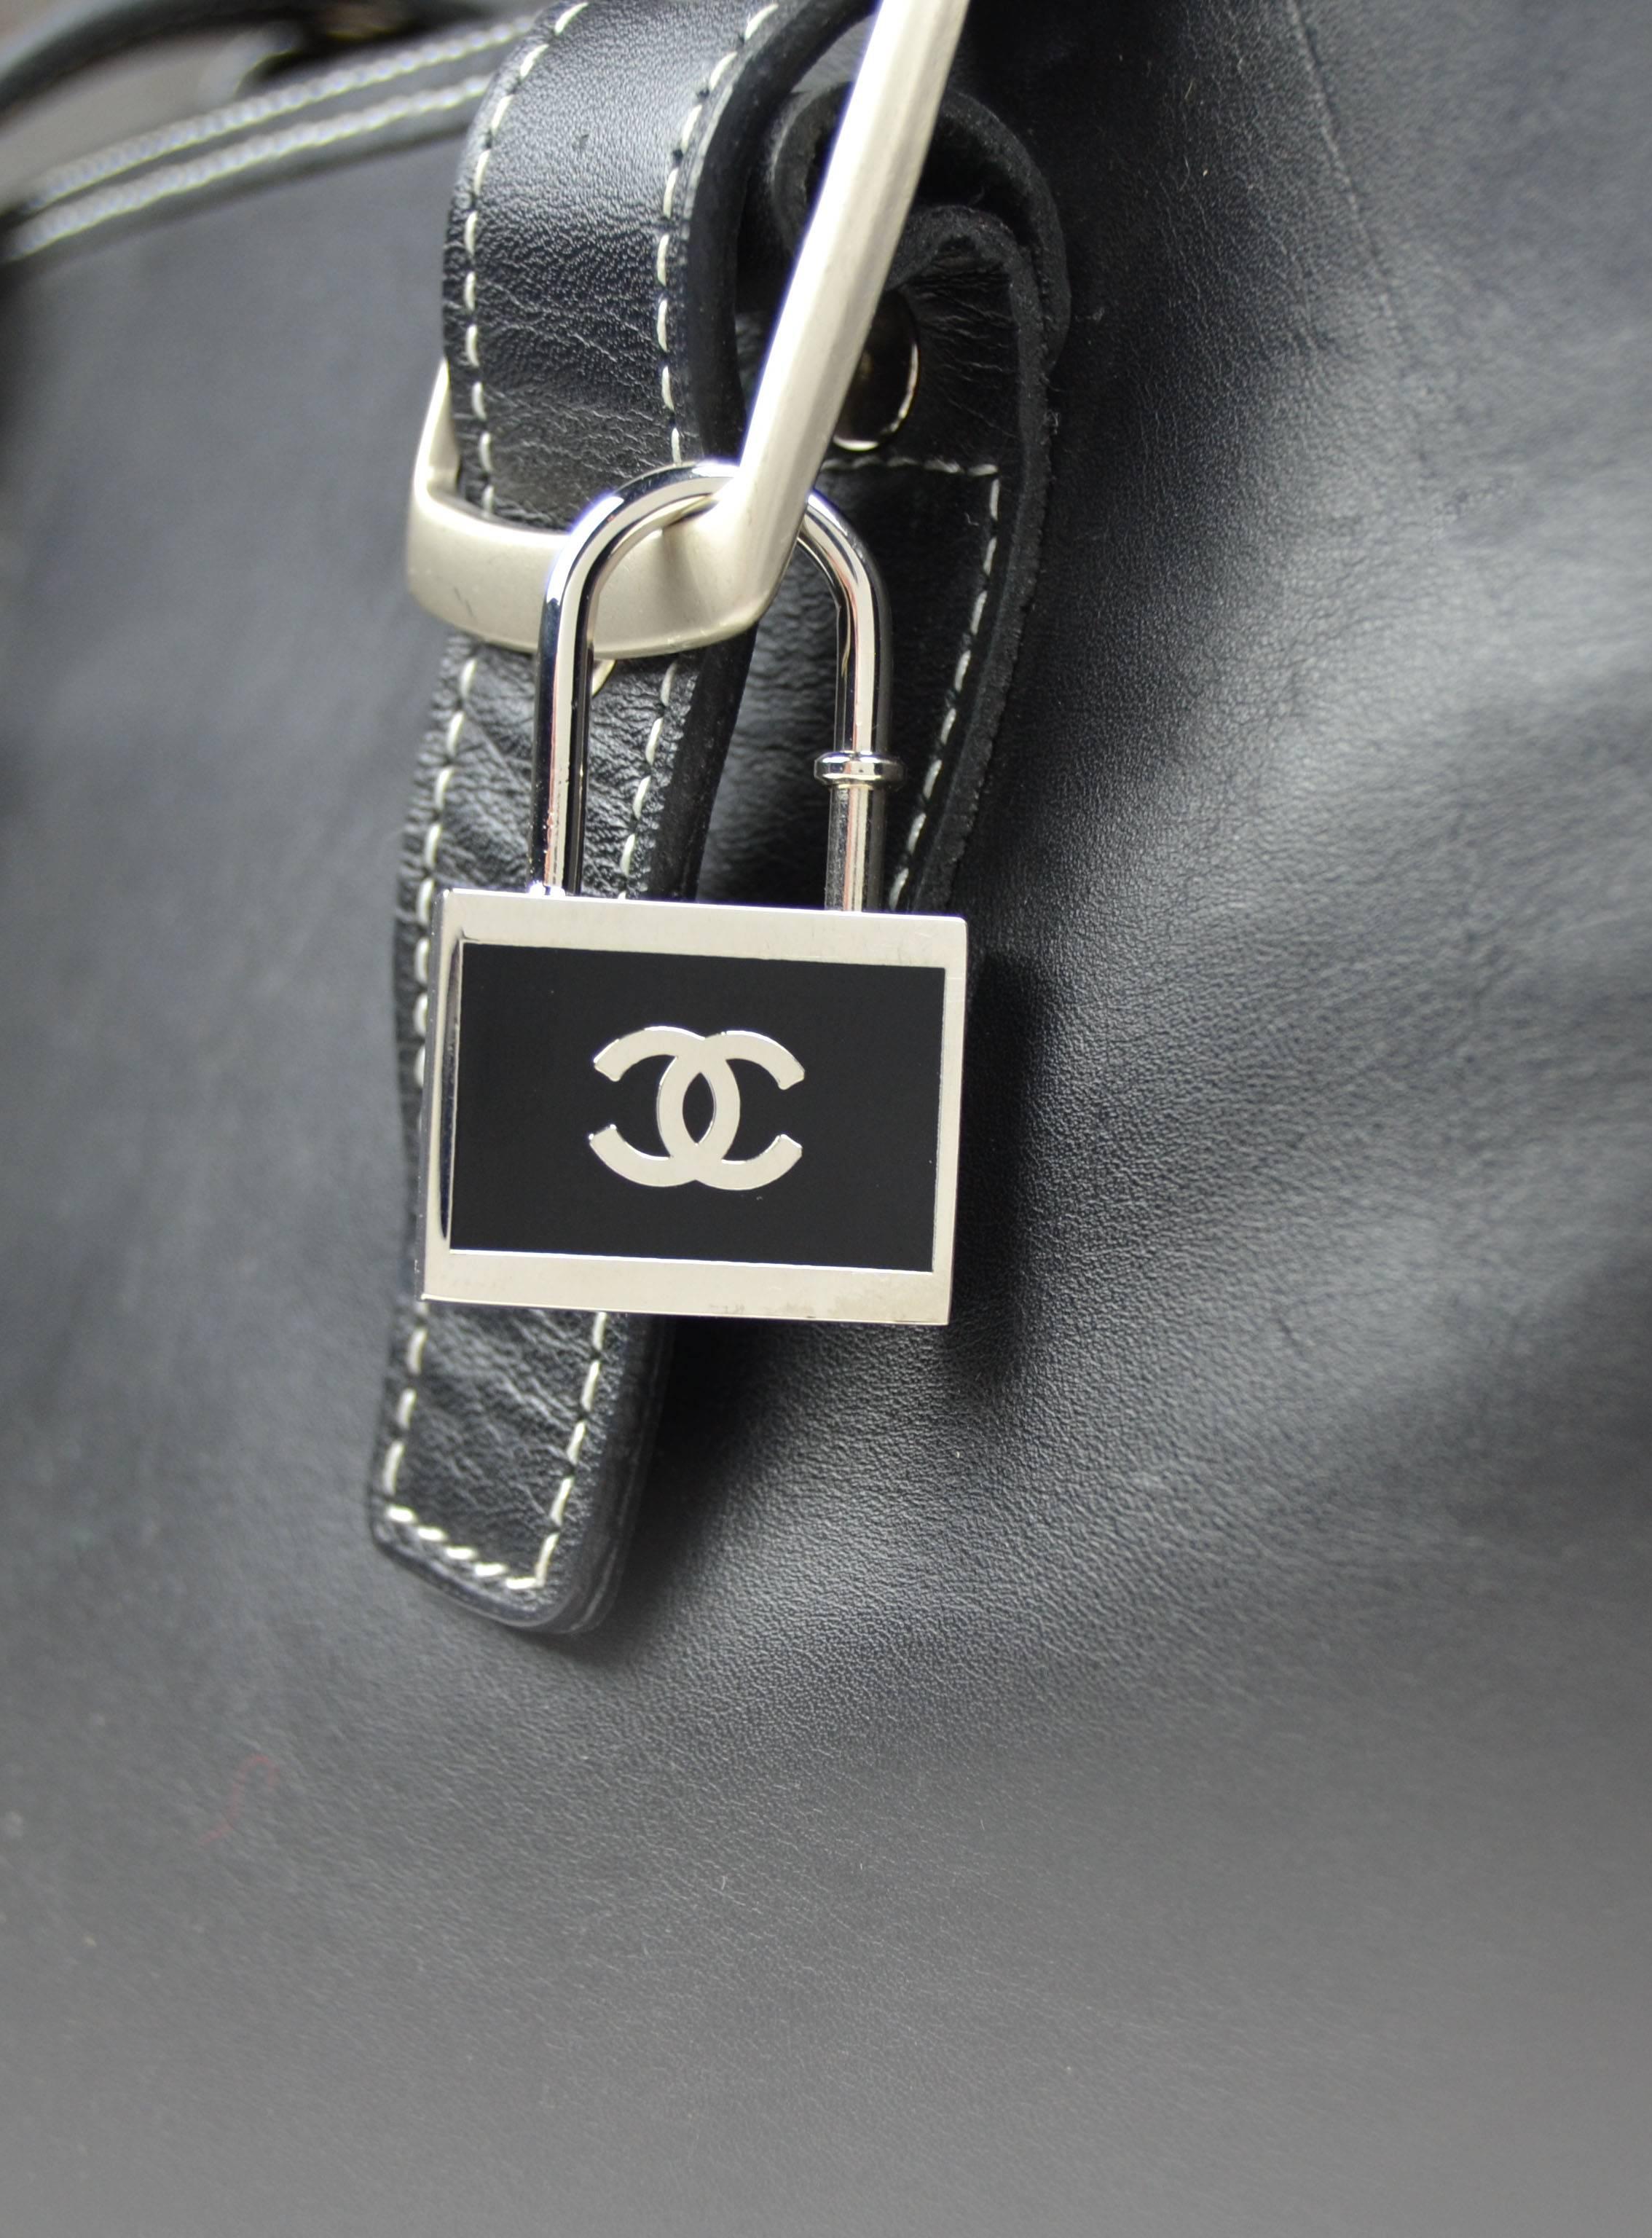 Black and Silvertone Padlock Keychain or Necklace Pendant in the Style of Chanel 2